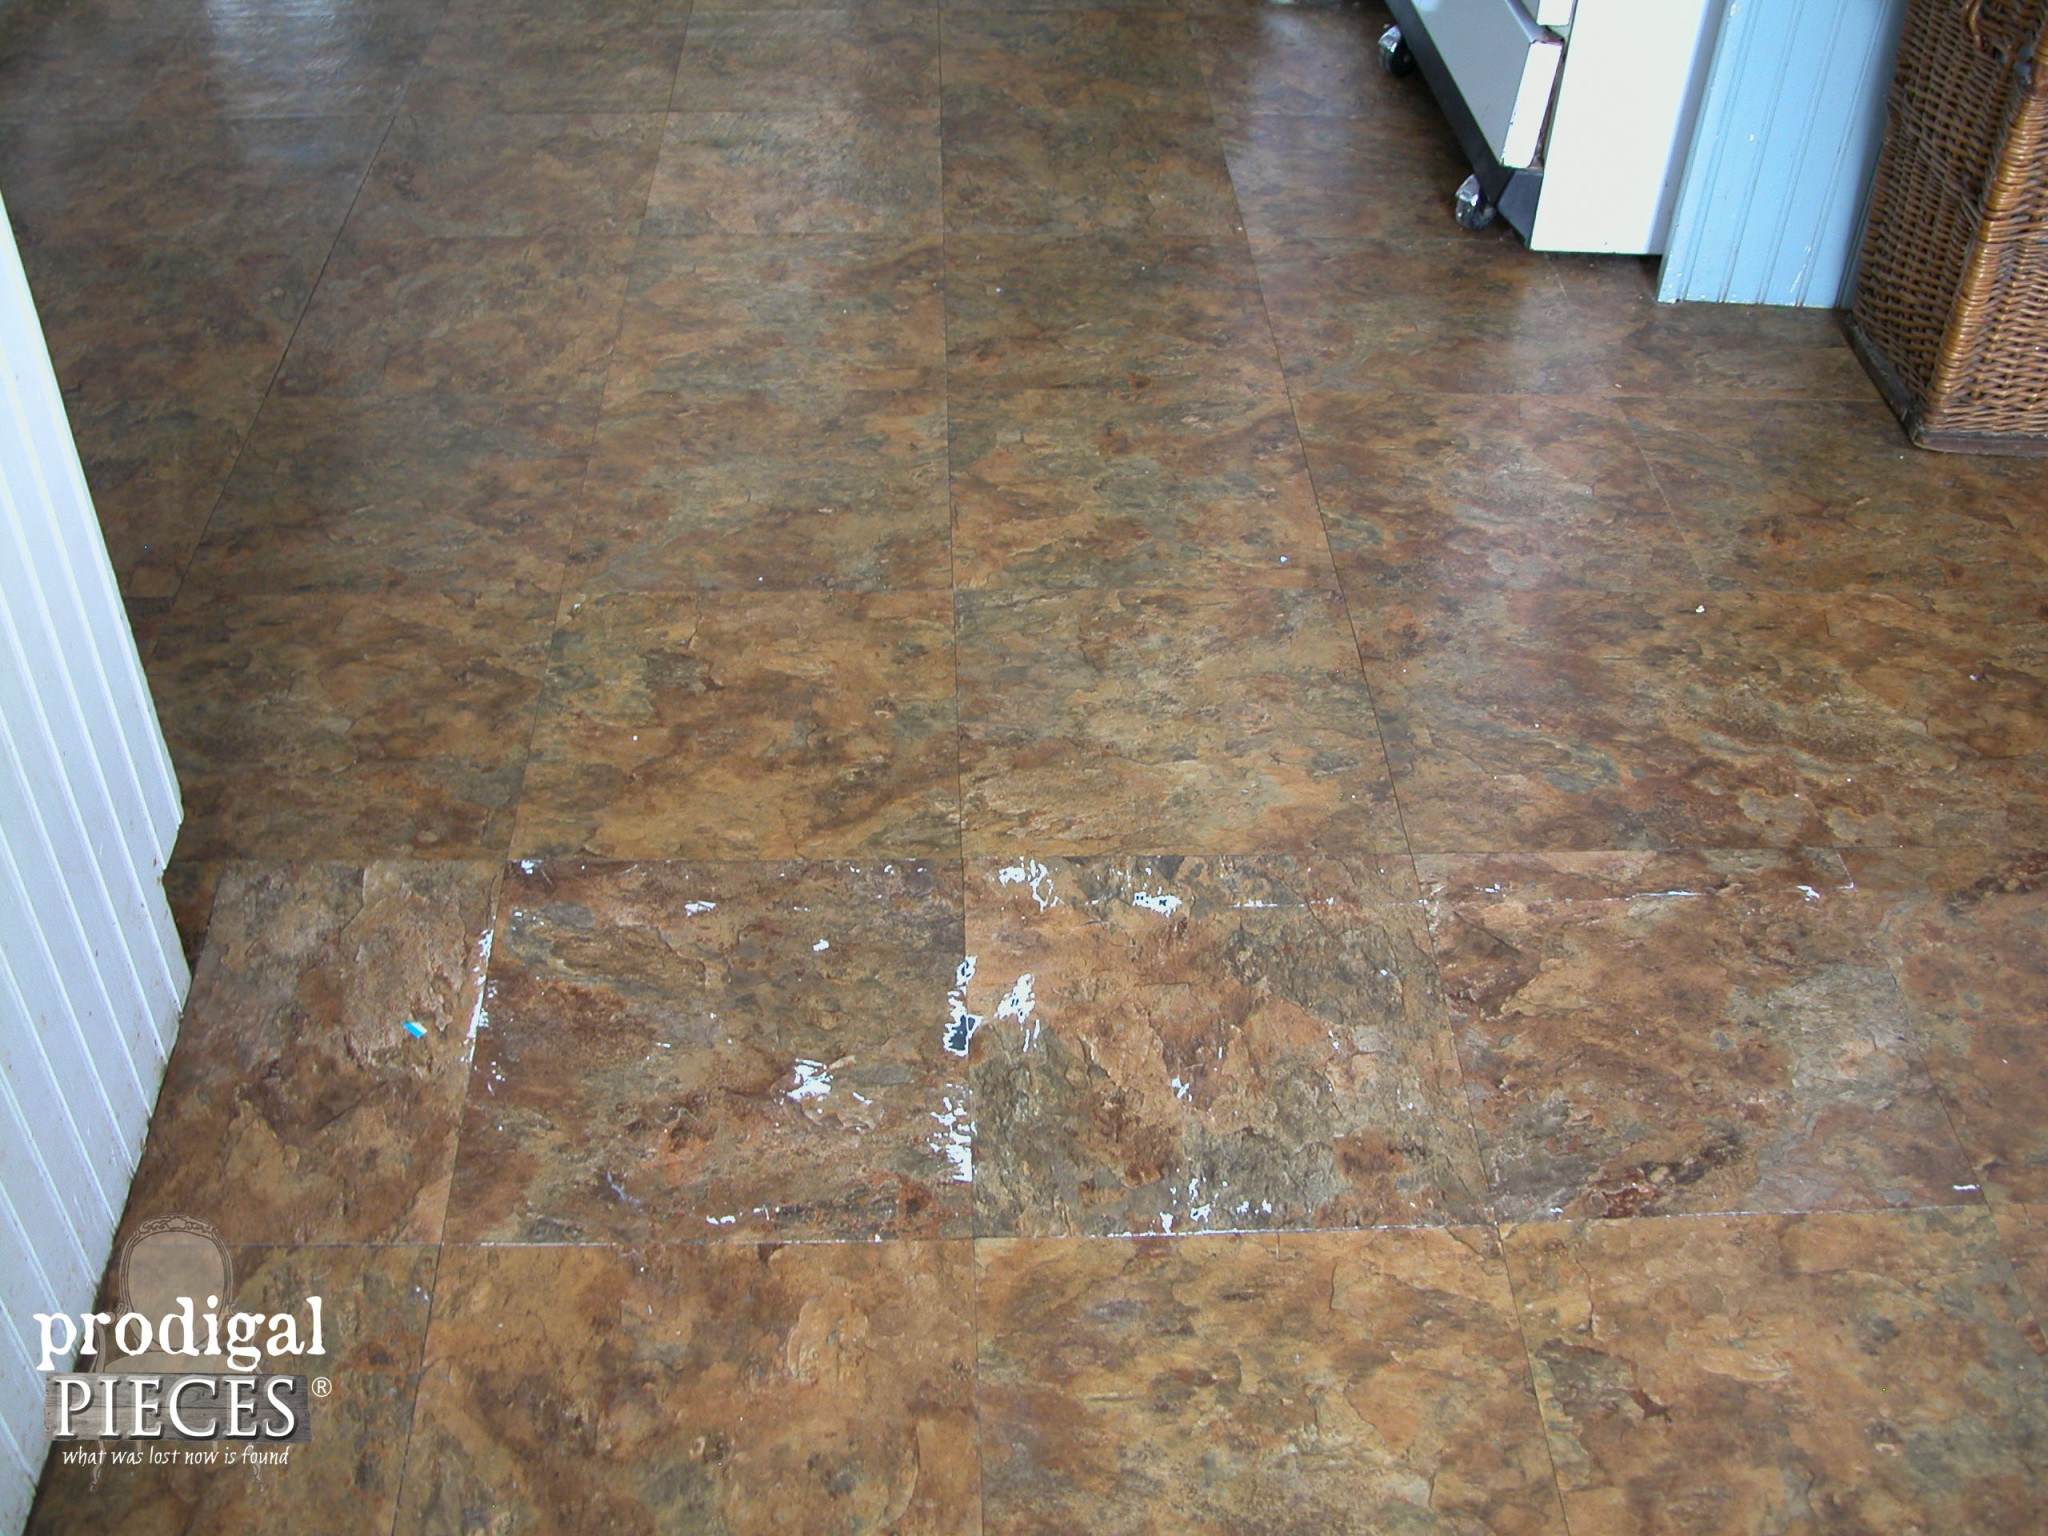 Worn Out Vinyl Flooring by Prodigal Pieces | www.prodigalpieces.com